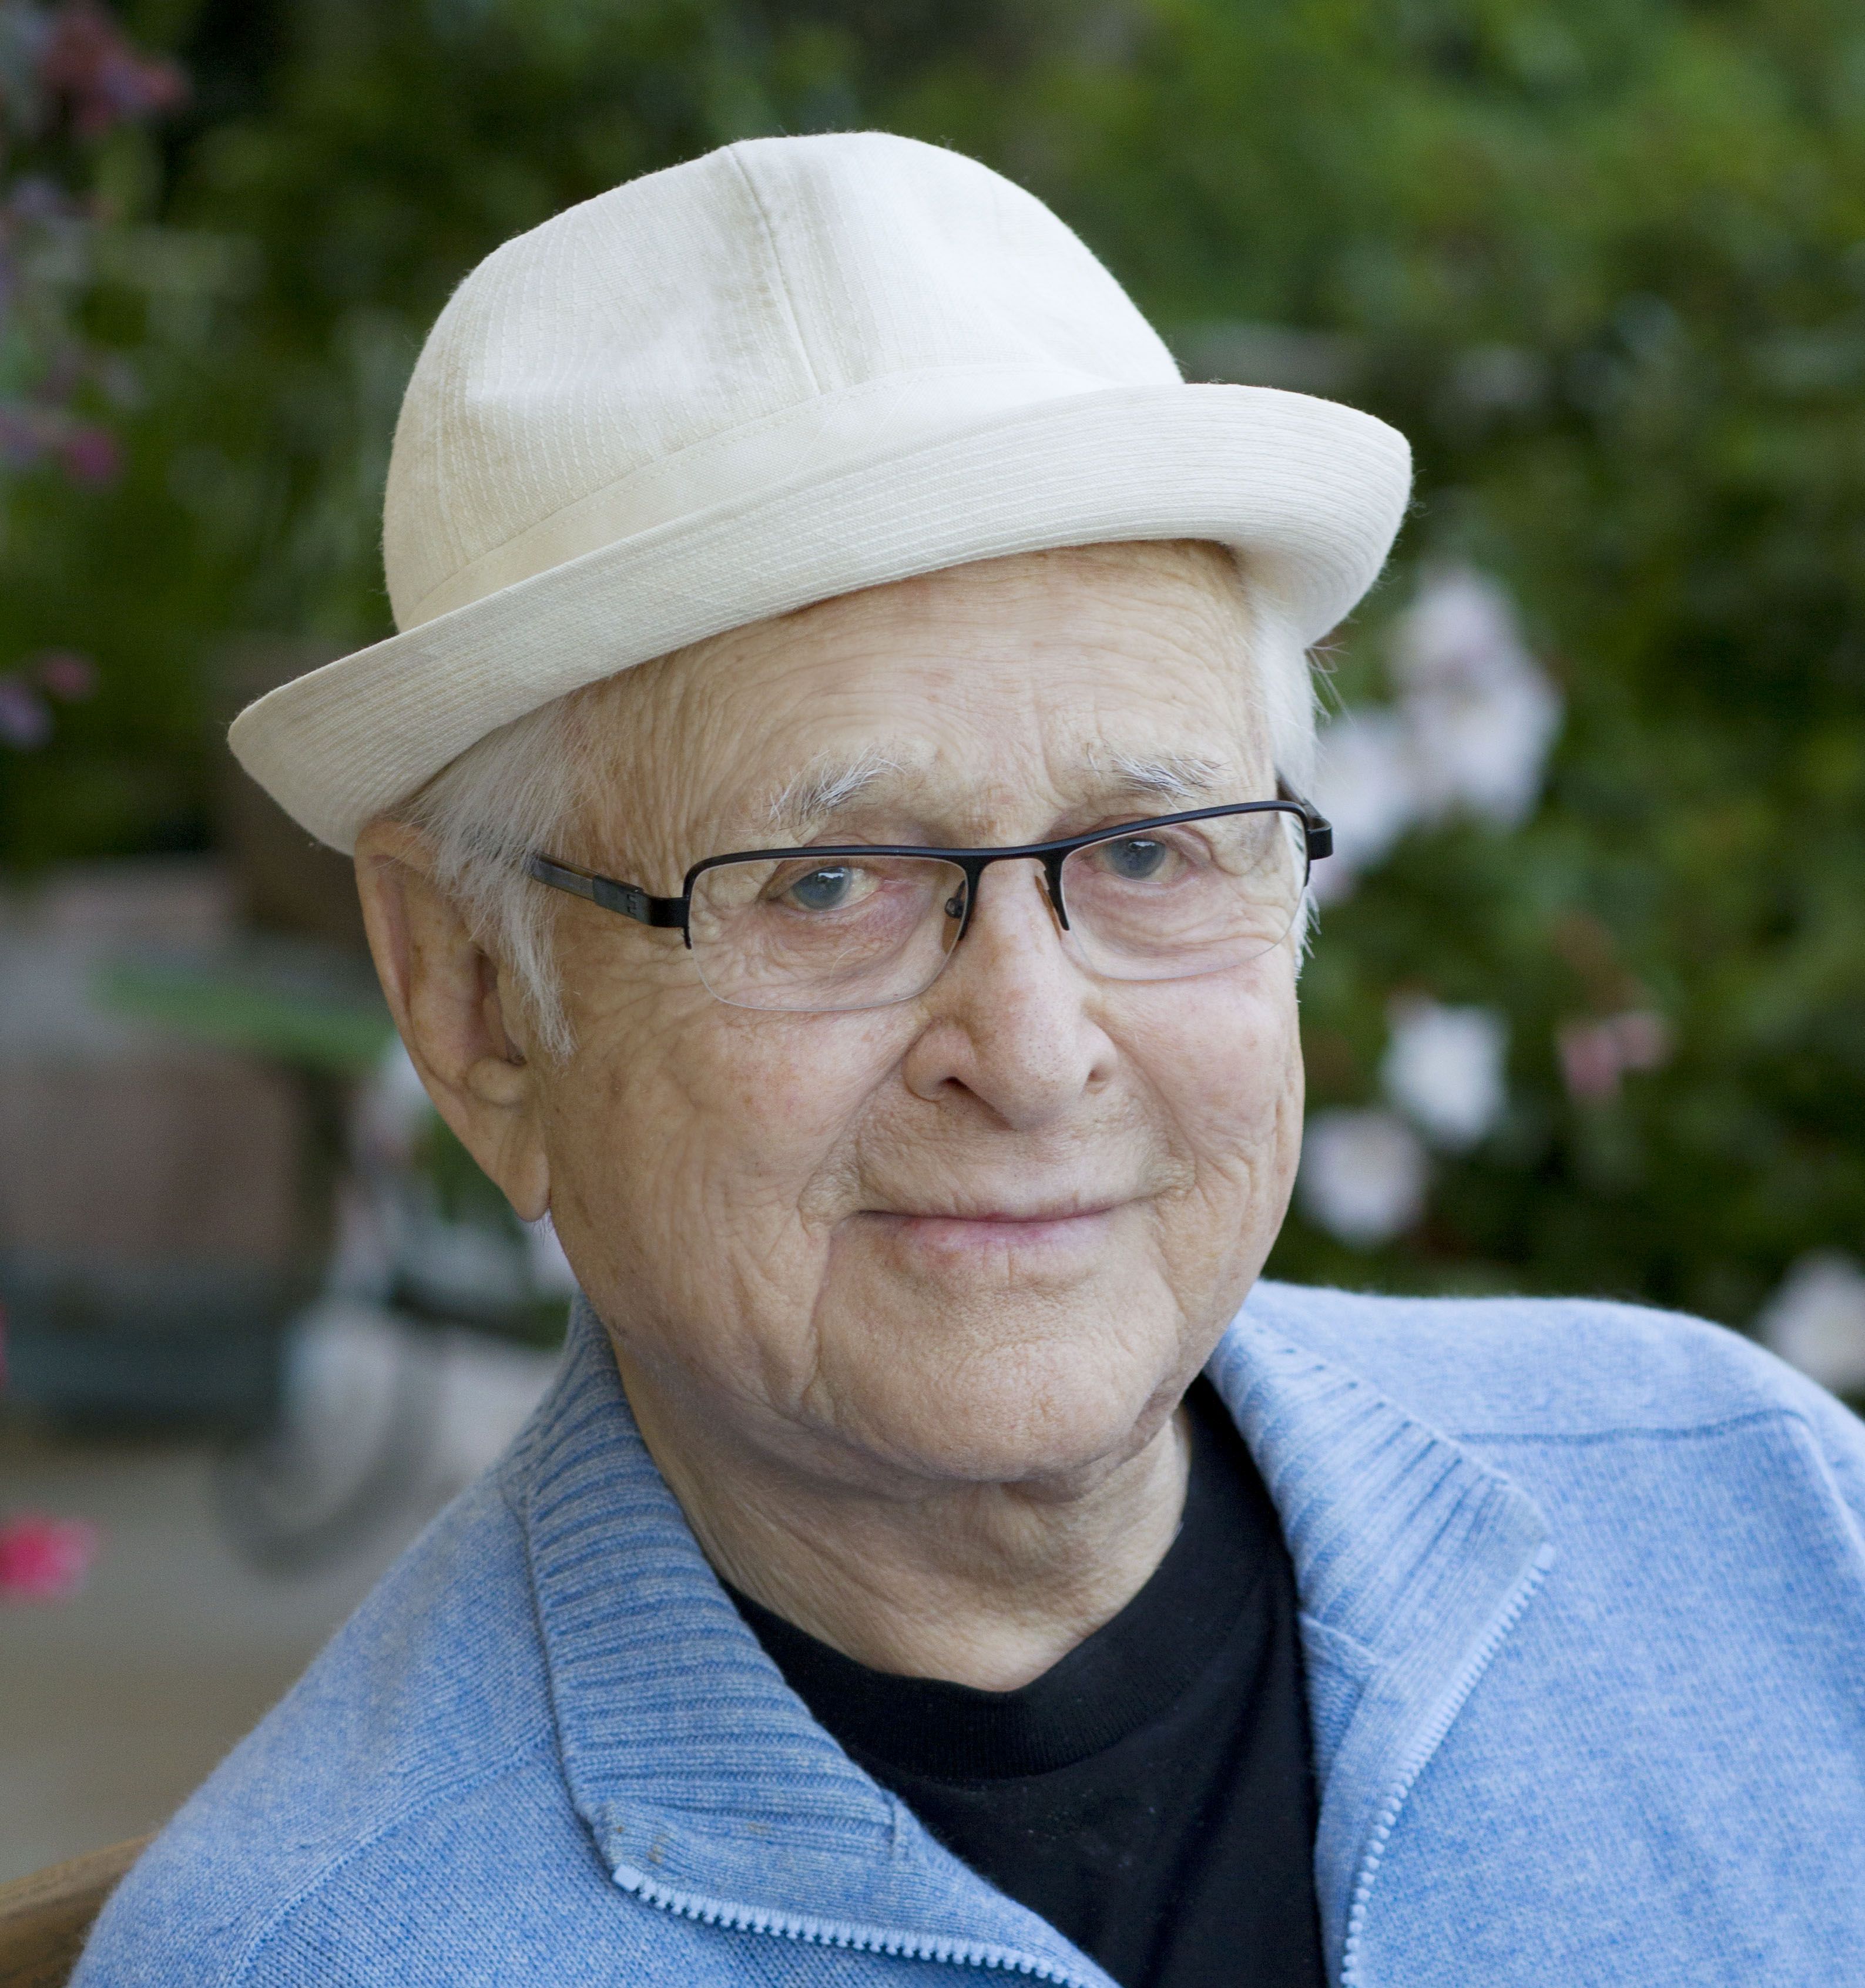 Groundbreaking television producer, author and social activist Norman Lear will deliver the 28th Annual Nancy Hanks Lecture on Arts and Public Policy at the ... - NormanLear_Headshot